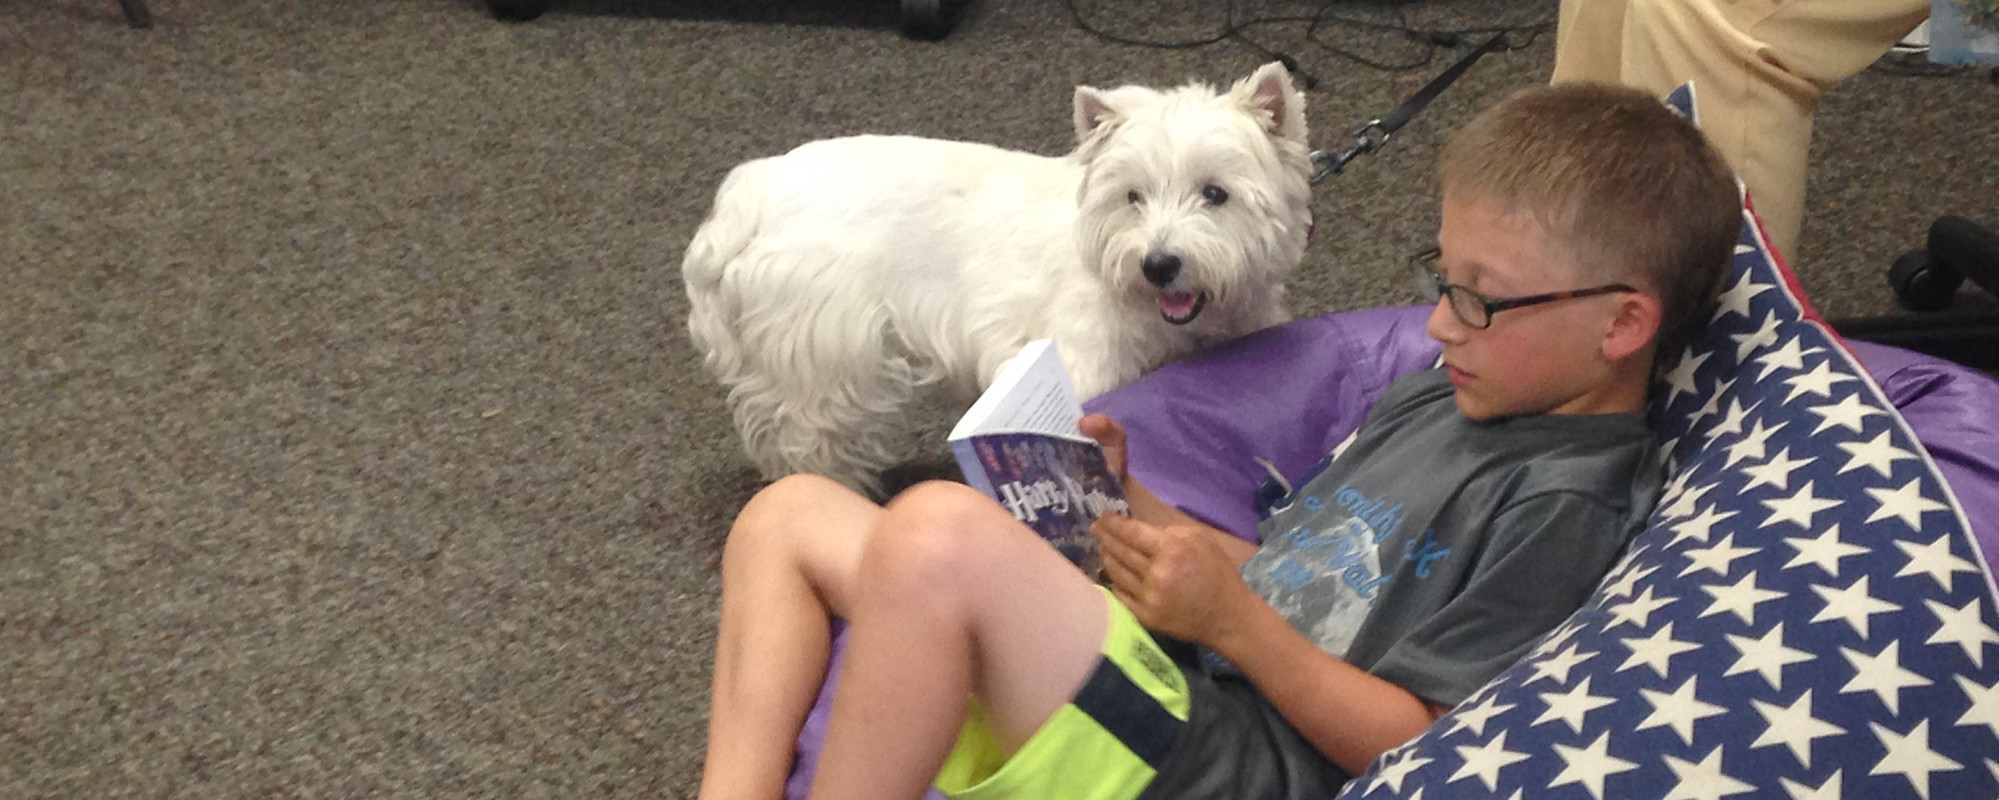 NPSD - Reading time with Dog